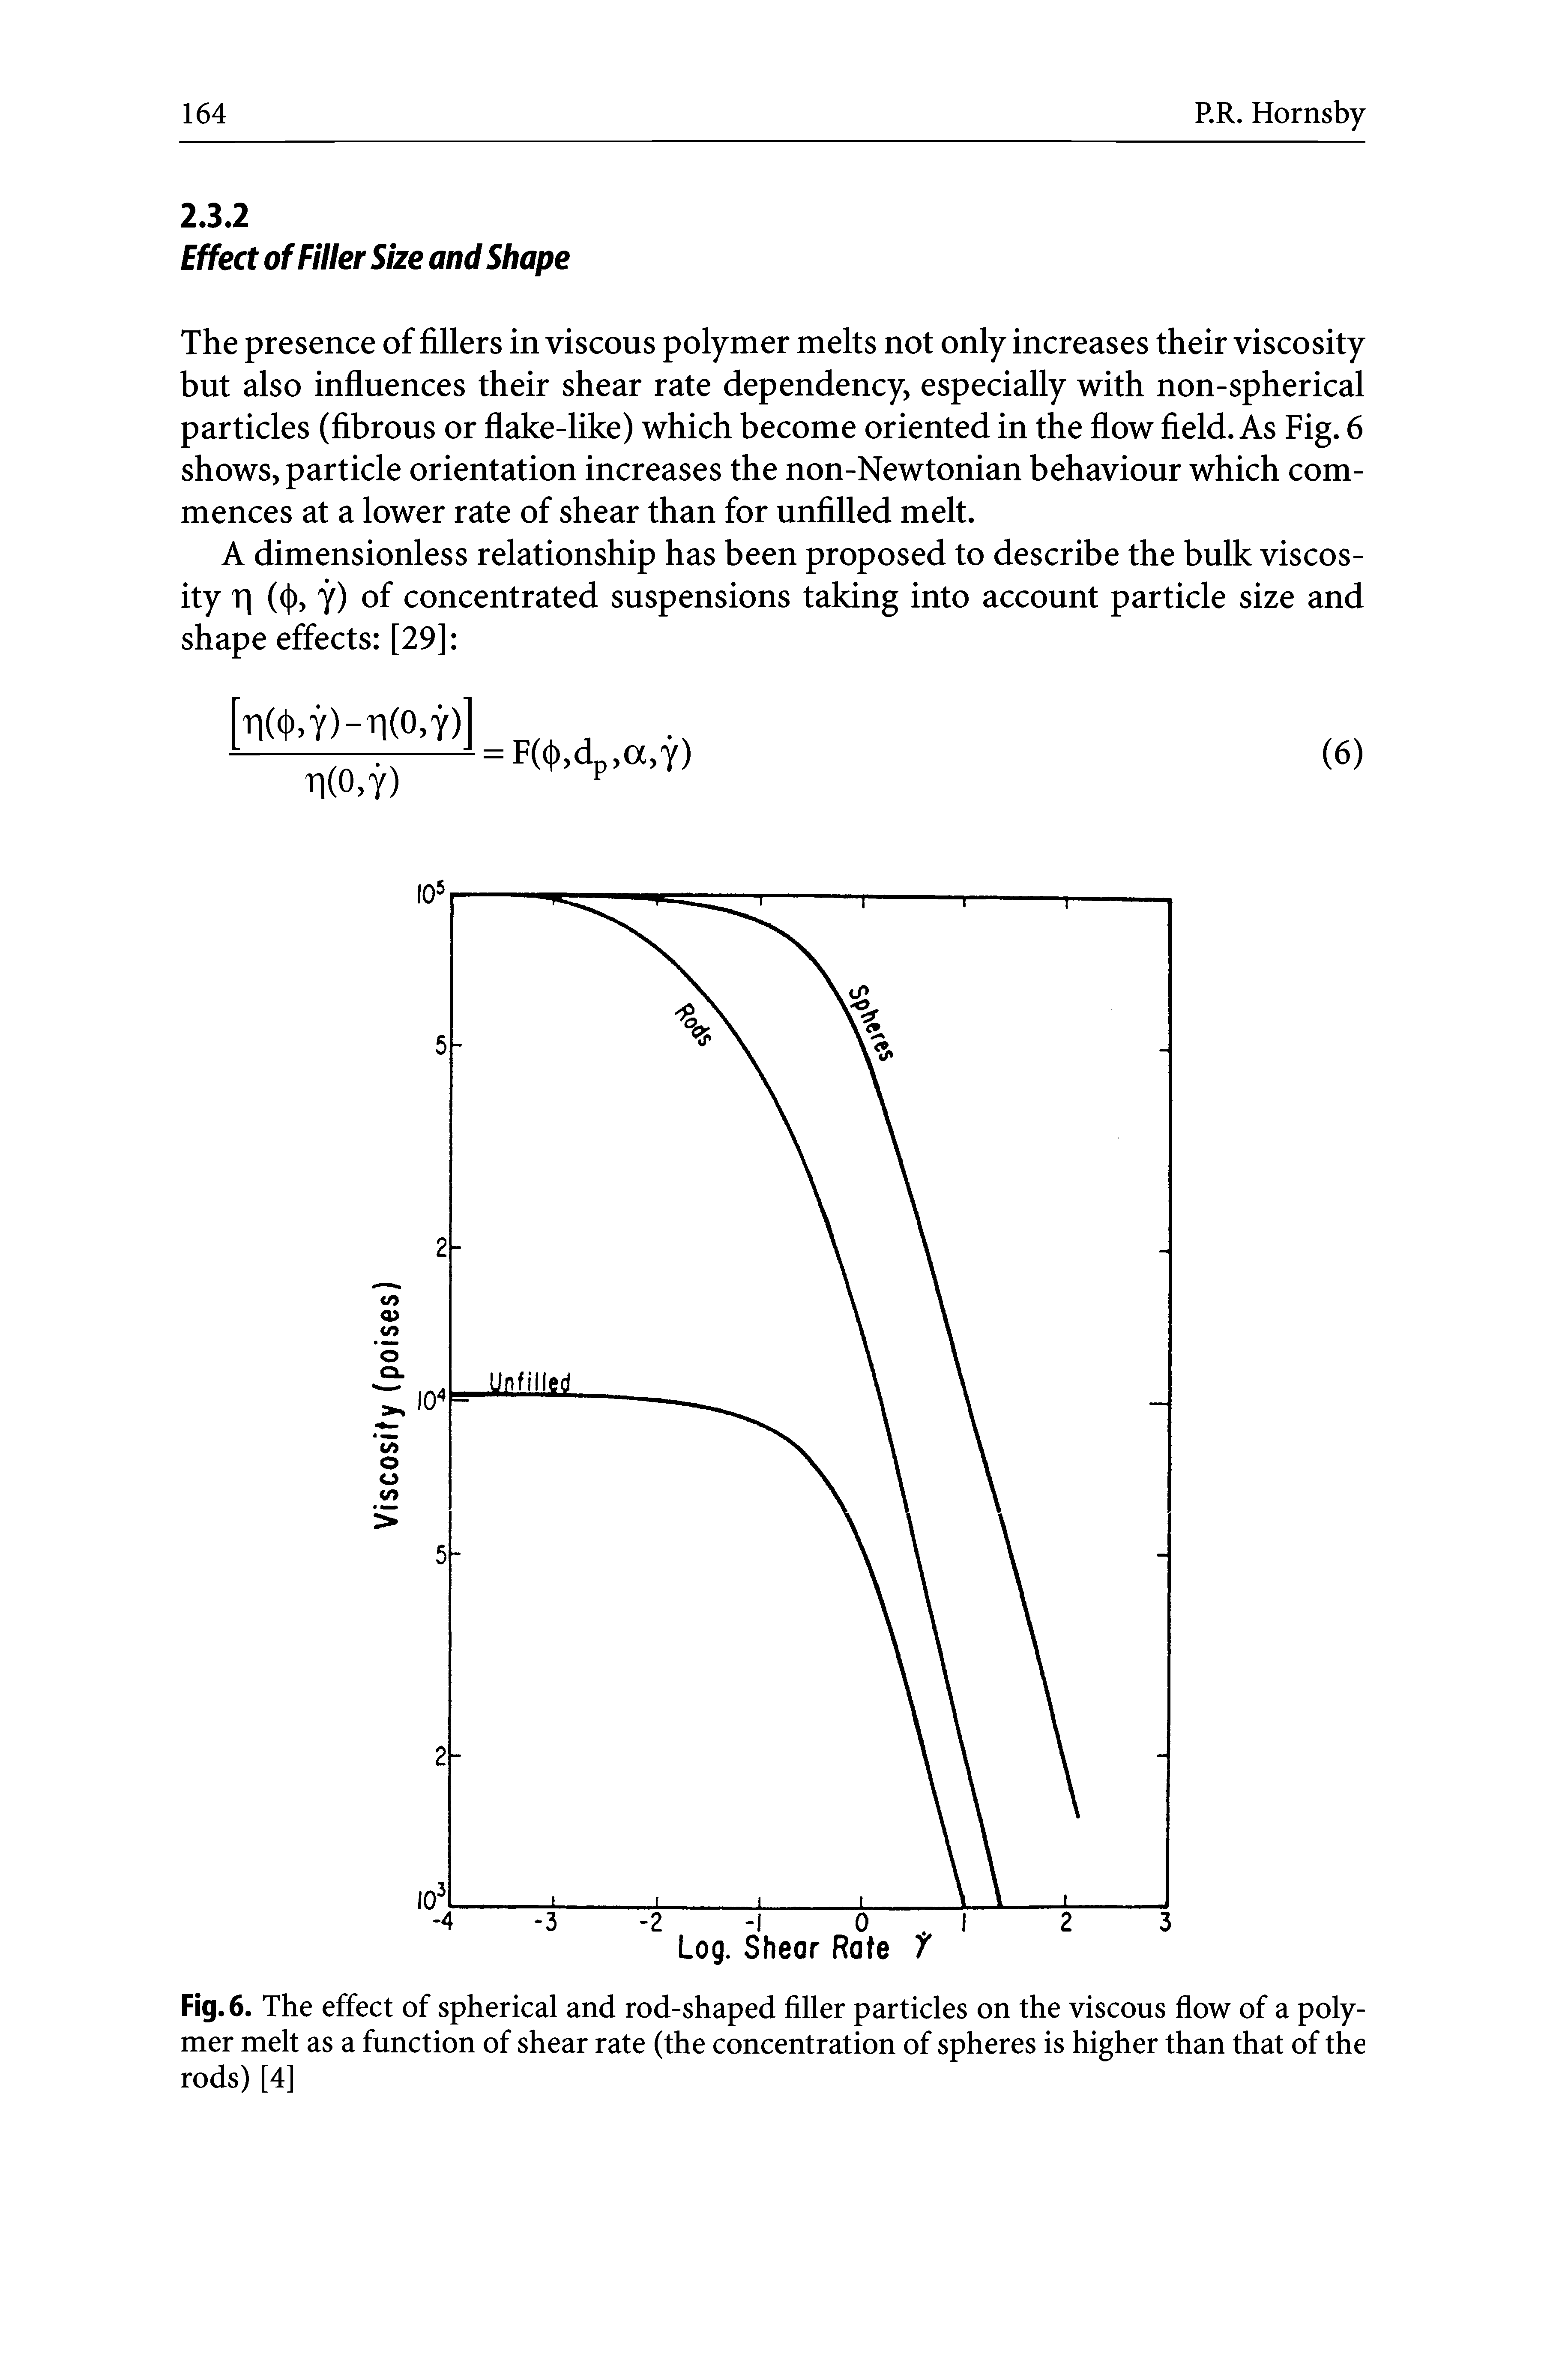 Fig. 6. The effect of spherical and rod-shaped filler particles on the viscous flow of a polymer melt as a function of shear rate (the concentration of spheres is higher than that of the rods) [4]...